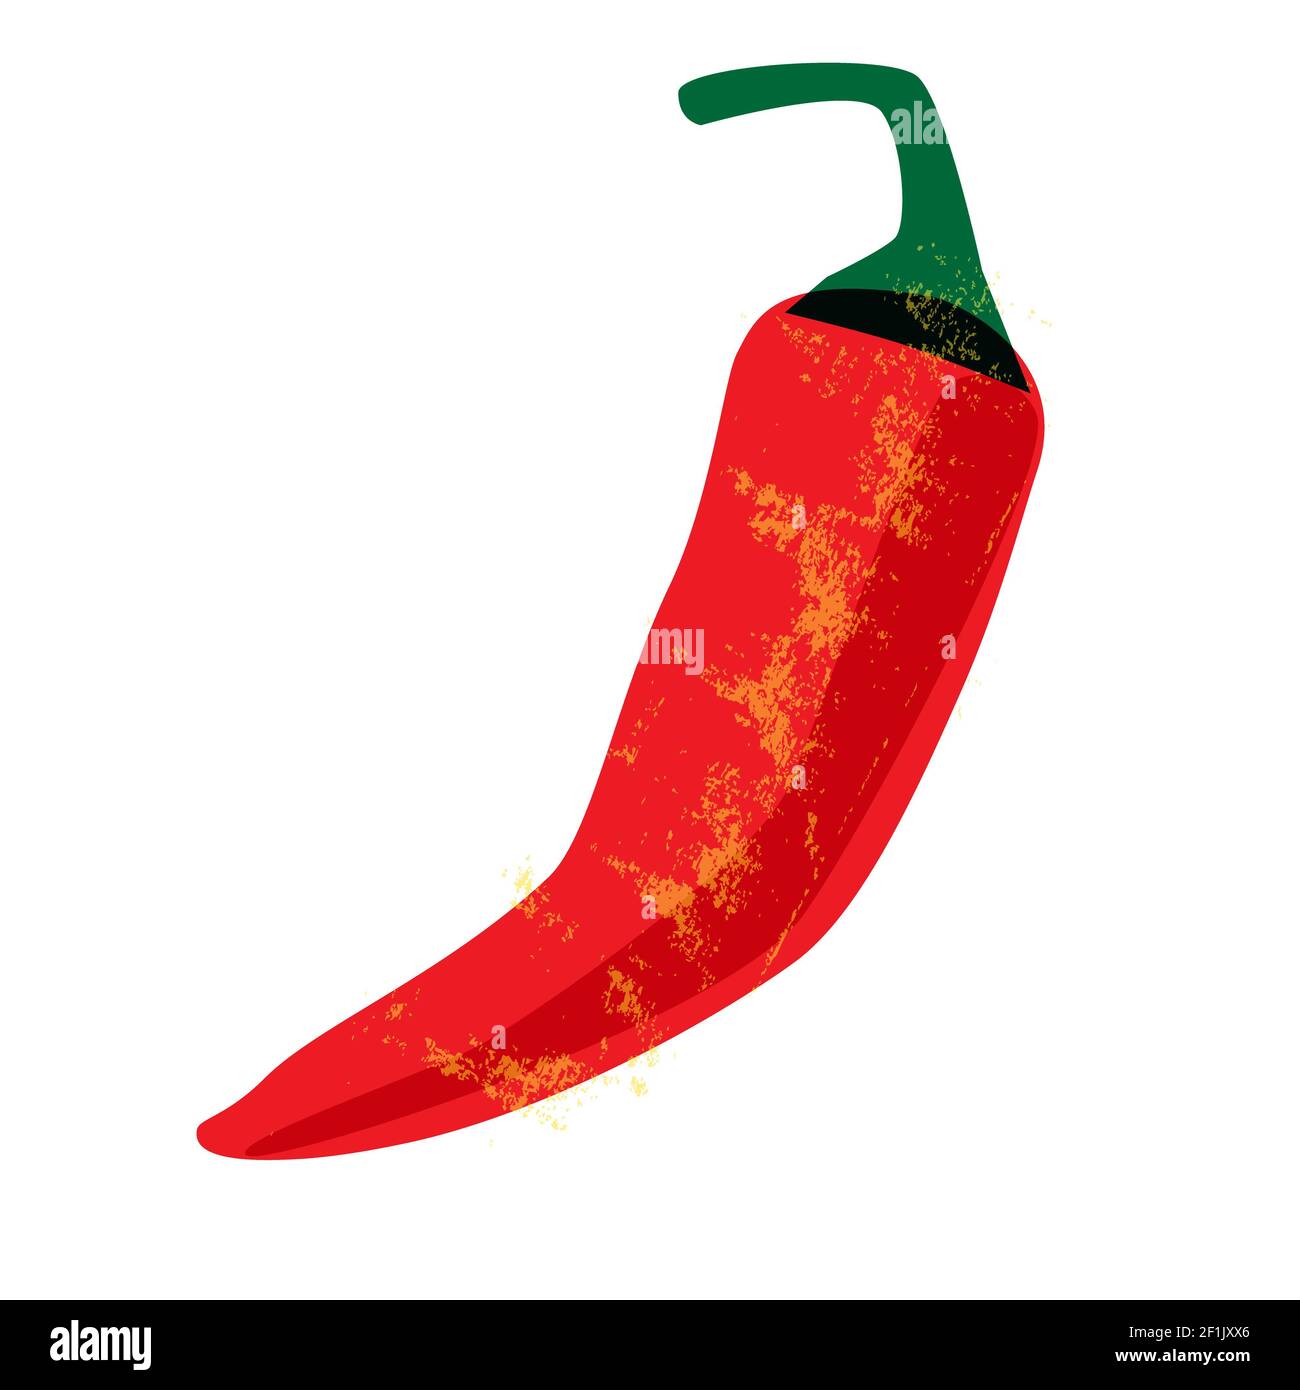 Organic red chili pepper, food illustration in vintage style Stock Photo